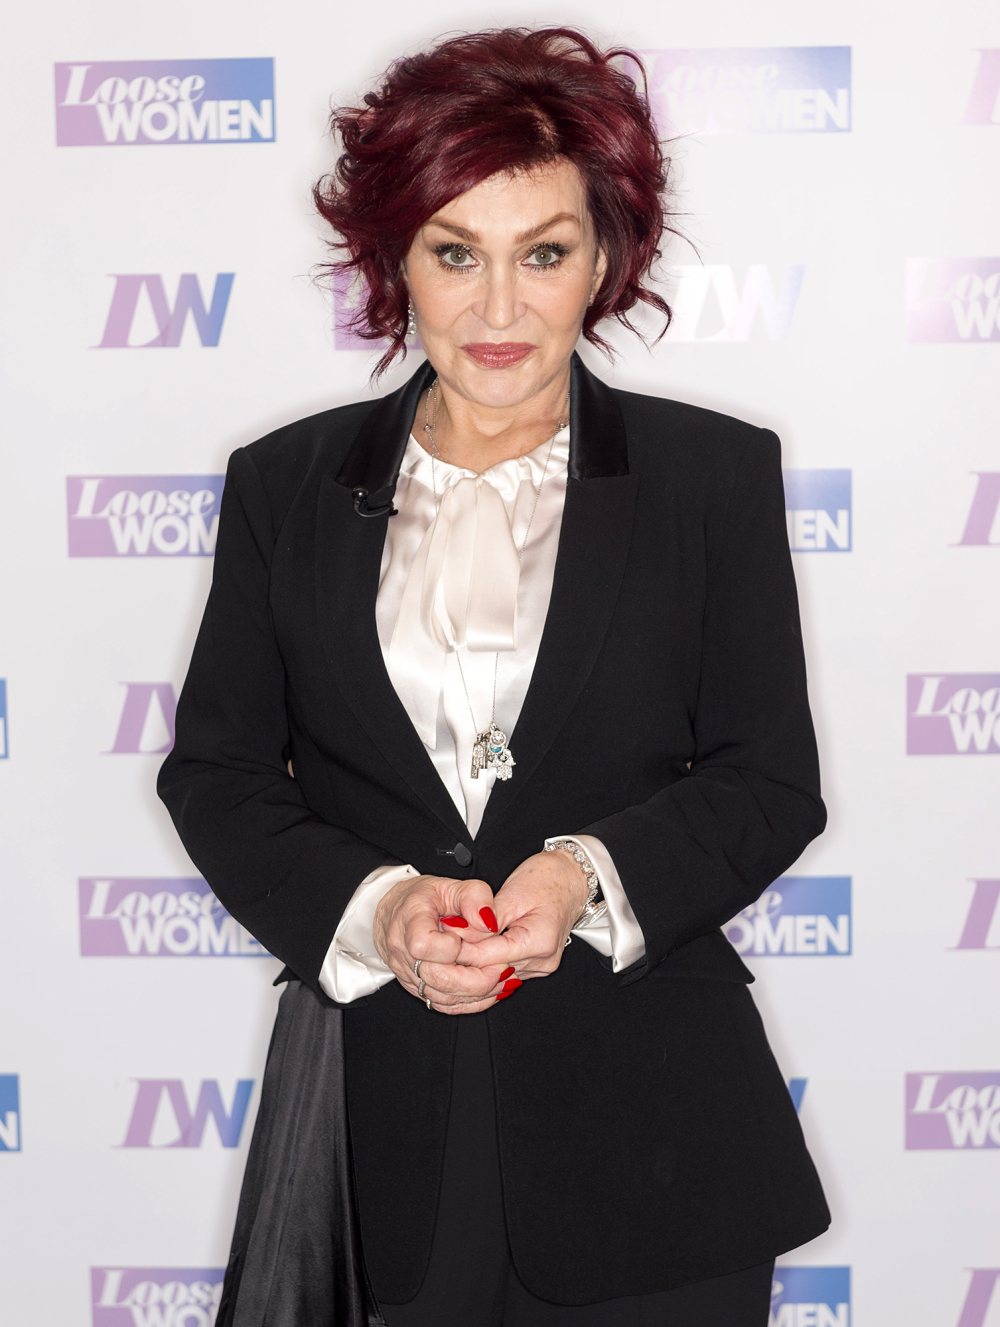 Sharon Osbourne Breaks Her Silence The Talk Exit First Interview